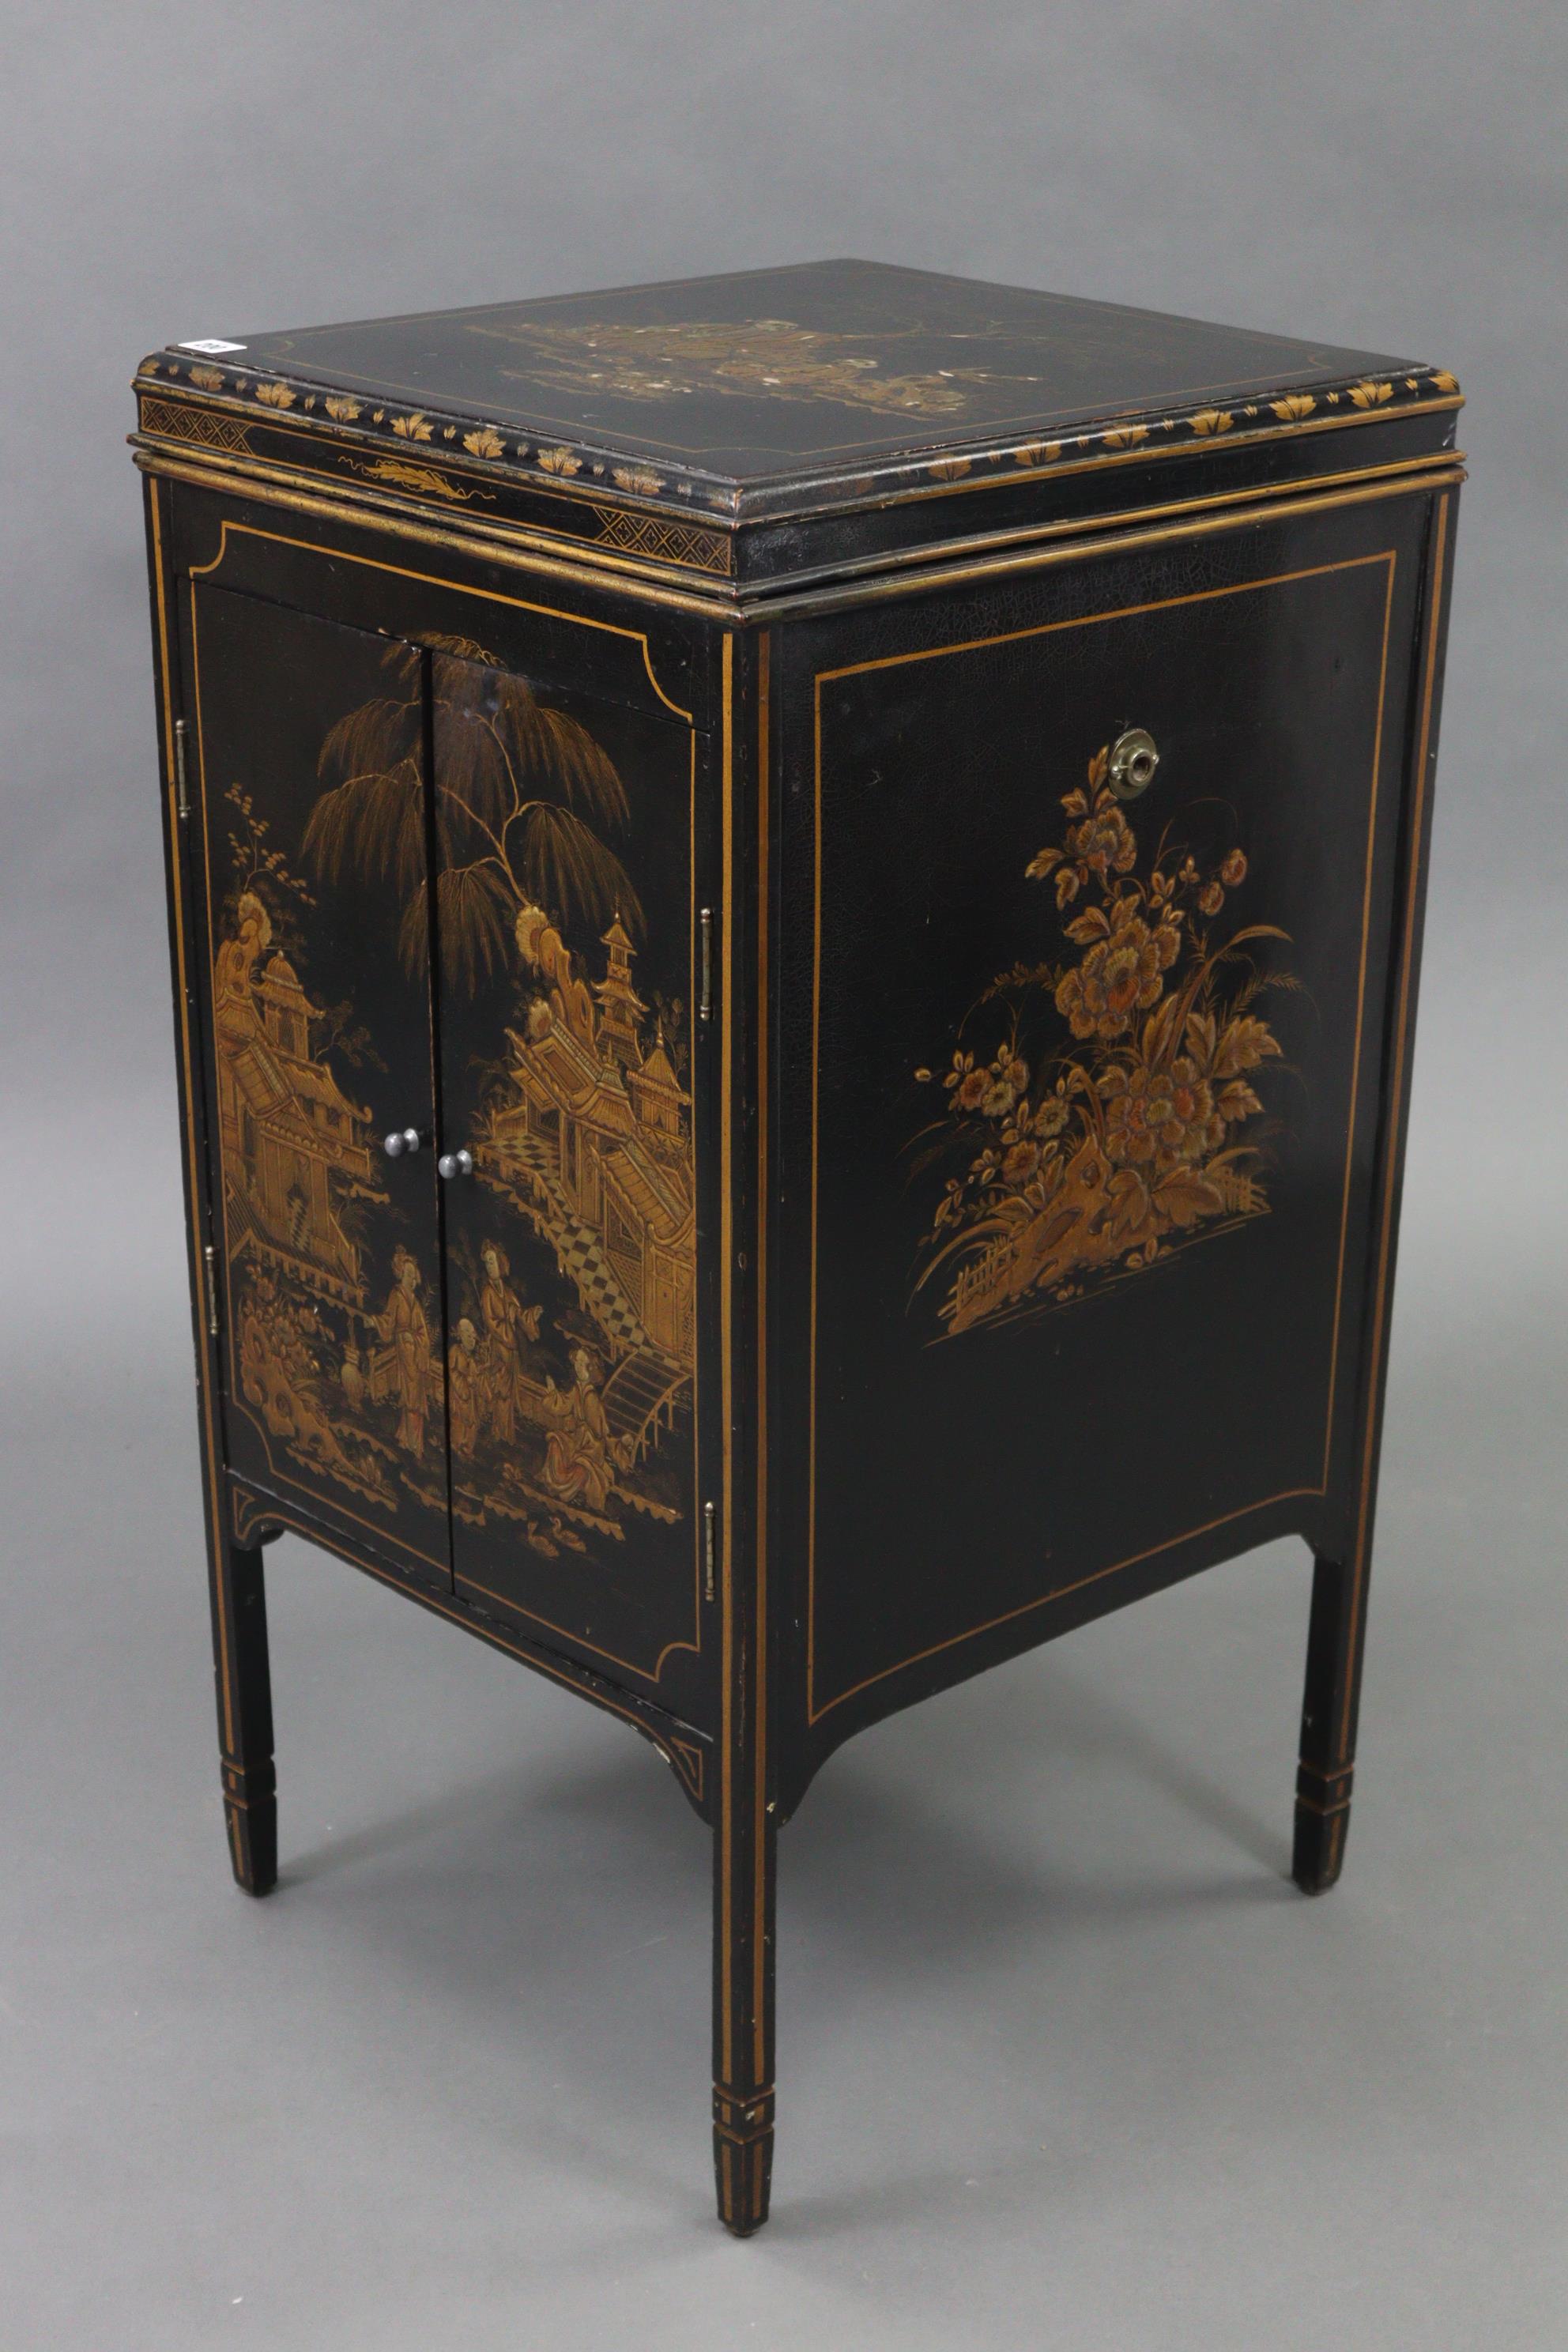 A Chinoiserie-style black lacquered floor-standing gramophone cabinet with gold figure-scene - Image 7 of 9